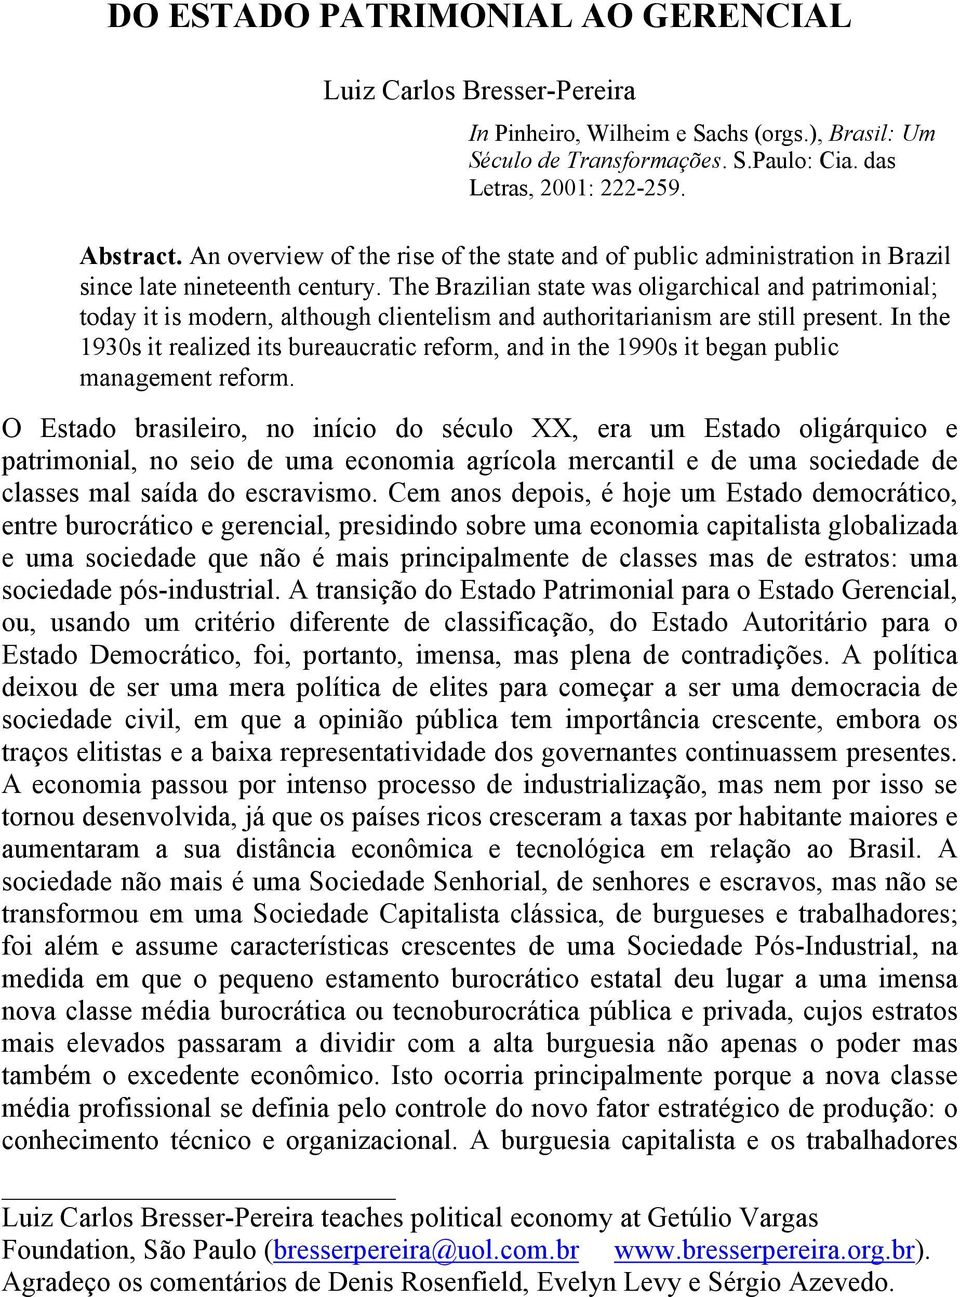 The Brazilian state was oligarchical and patrimonial; today it is modern, although clientelism and authoritarianism are still present.